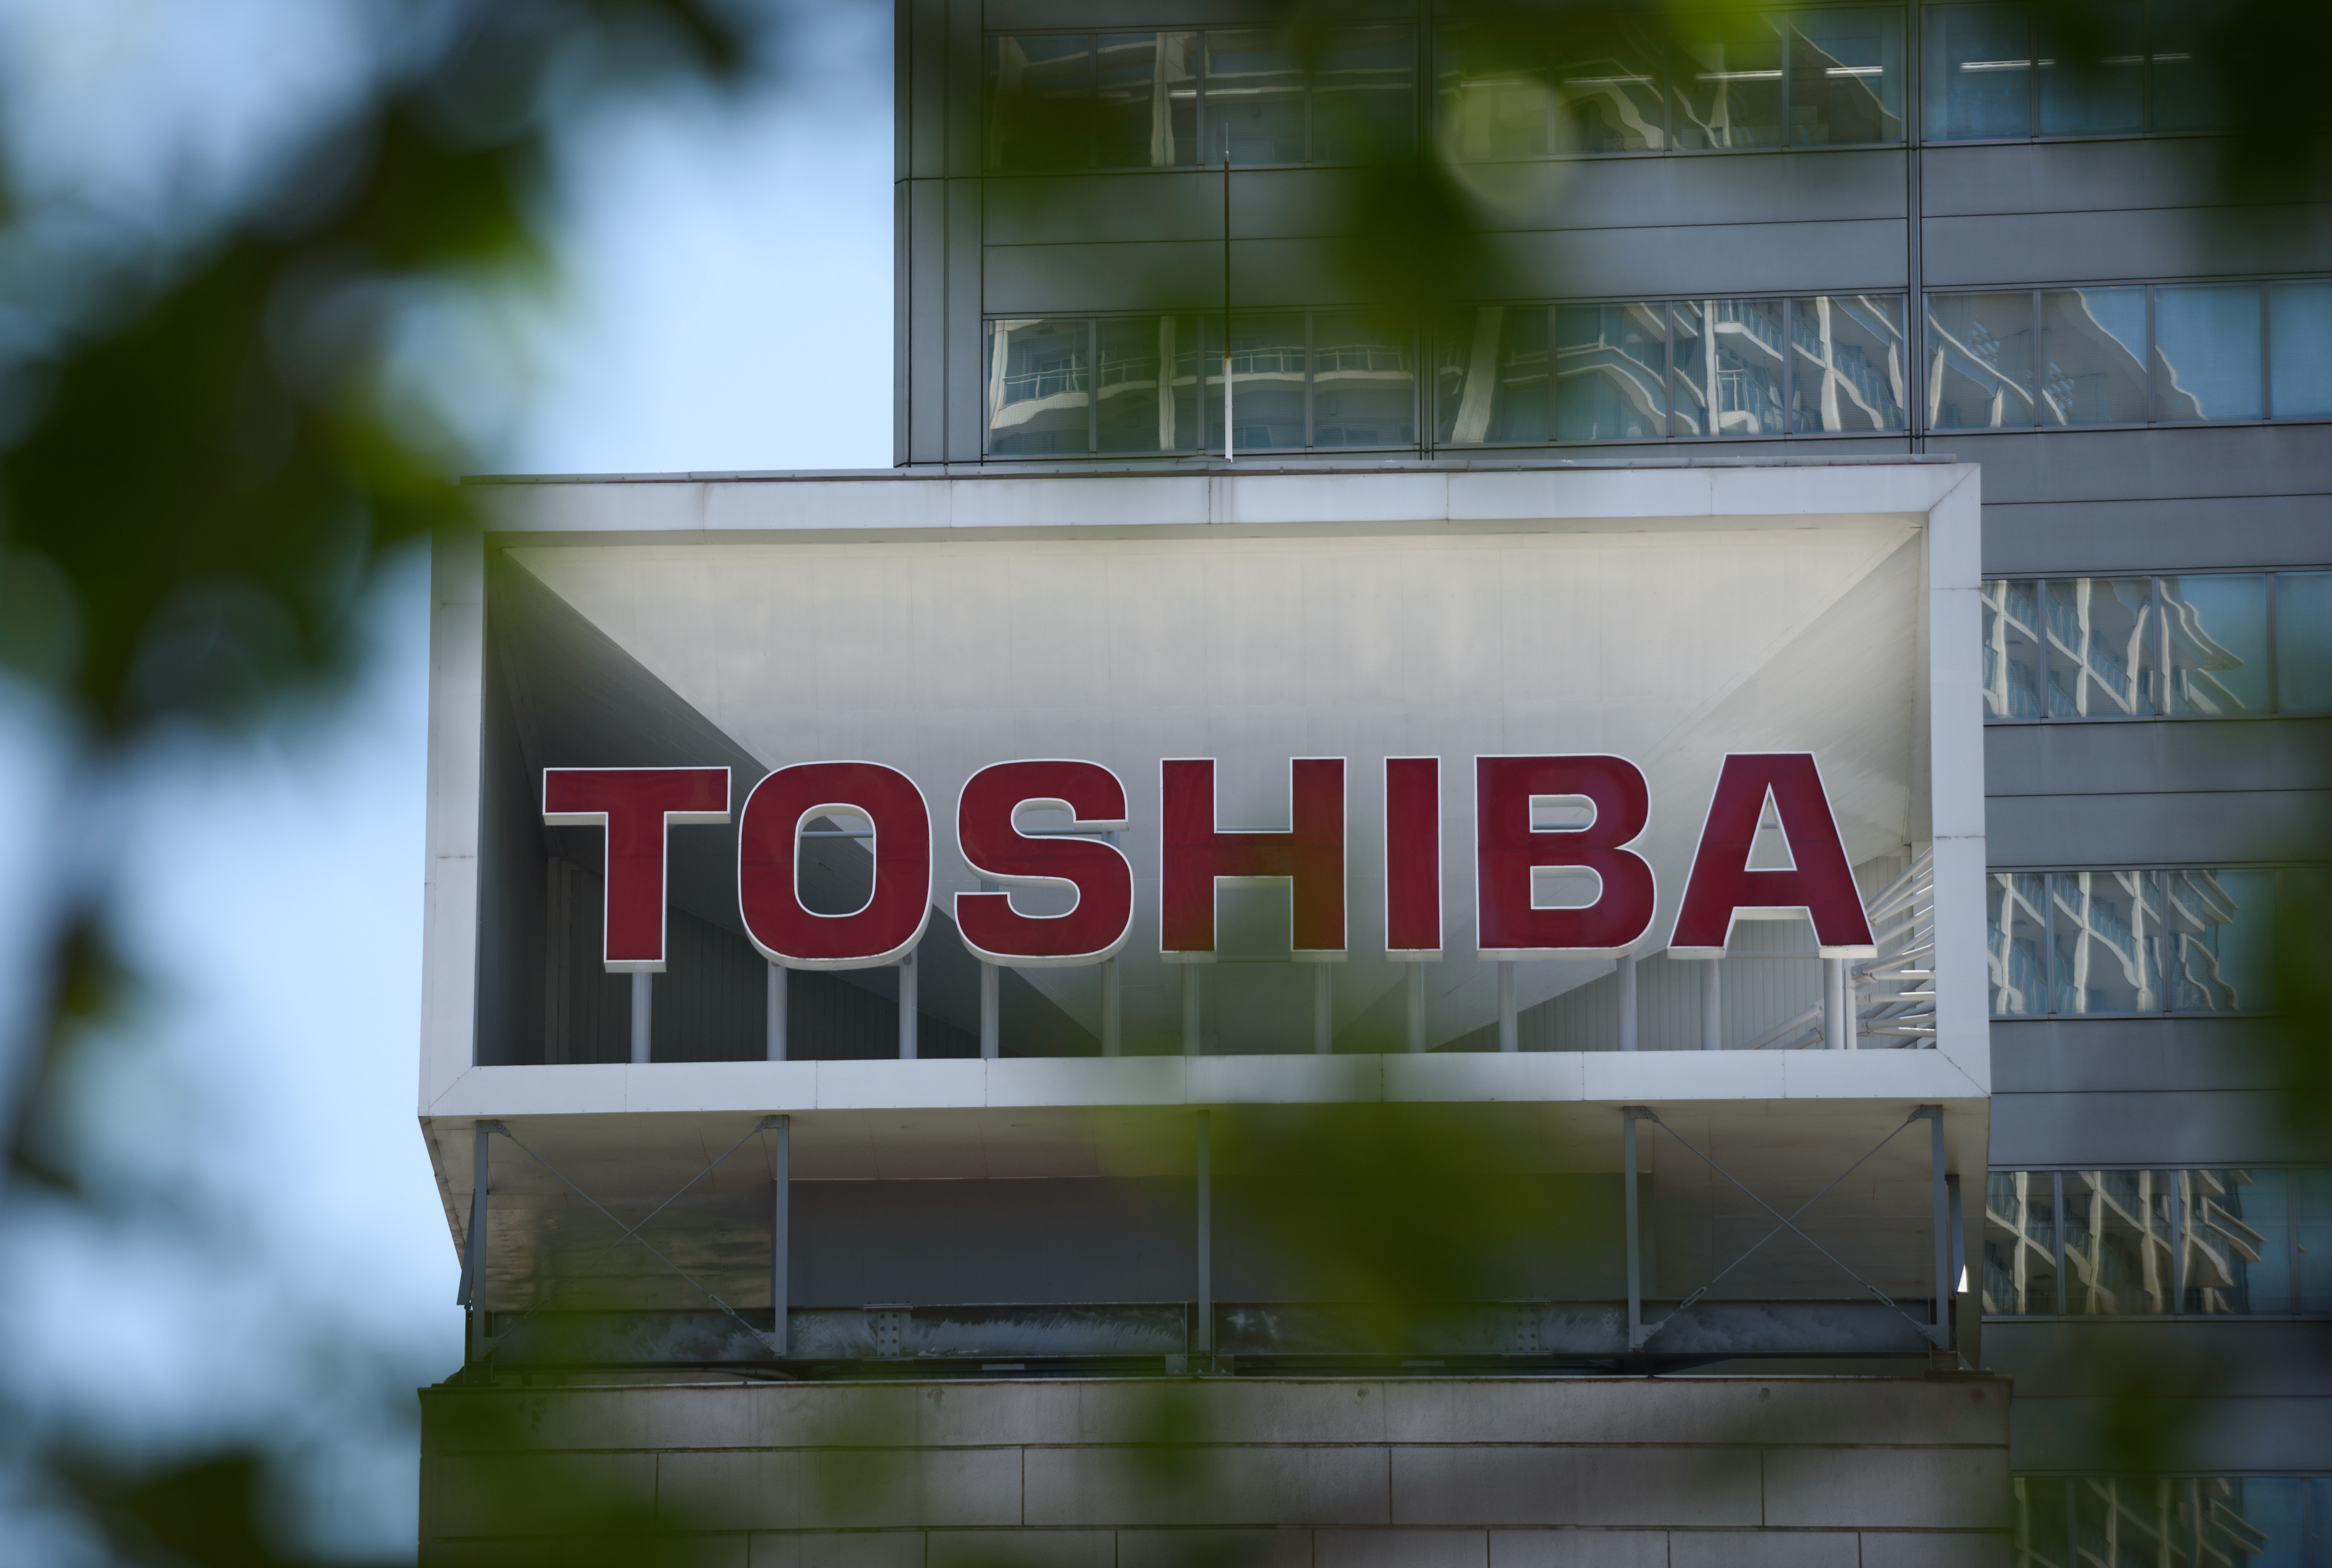 Toshiba to shed troubled assets, cut 7,000 jobs